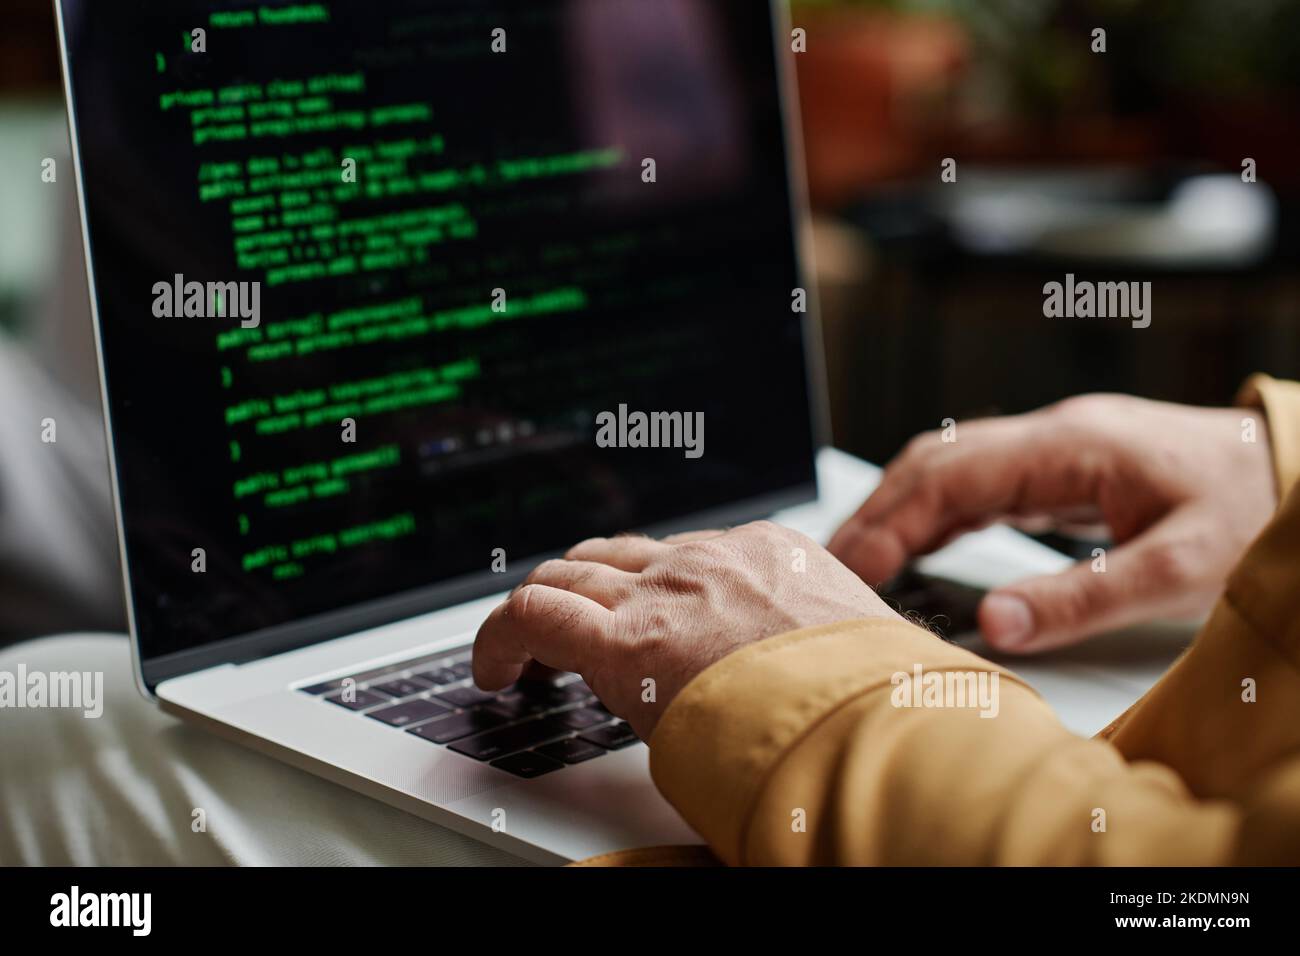 Hands of modern programmer or software developer typing on laptop keyboard while decoding data or working over new IT project Stock Photo